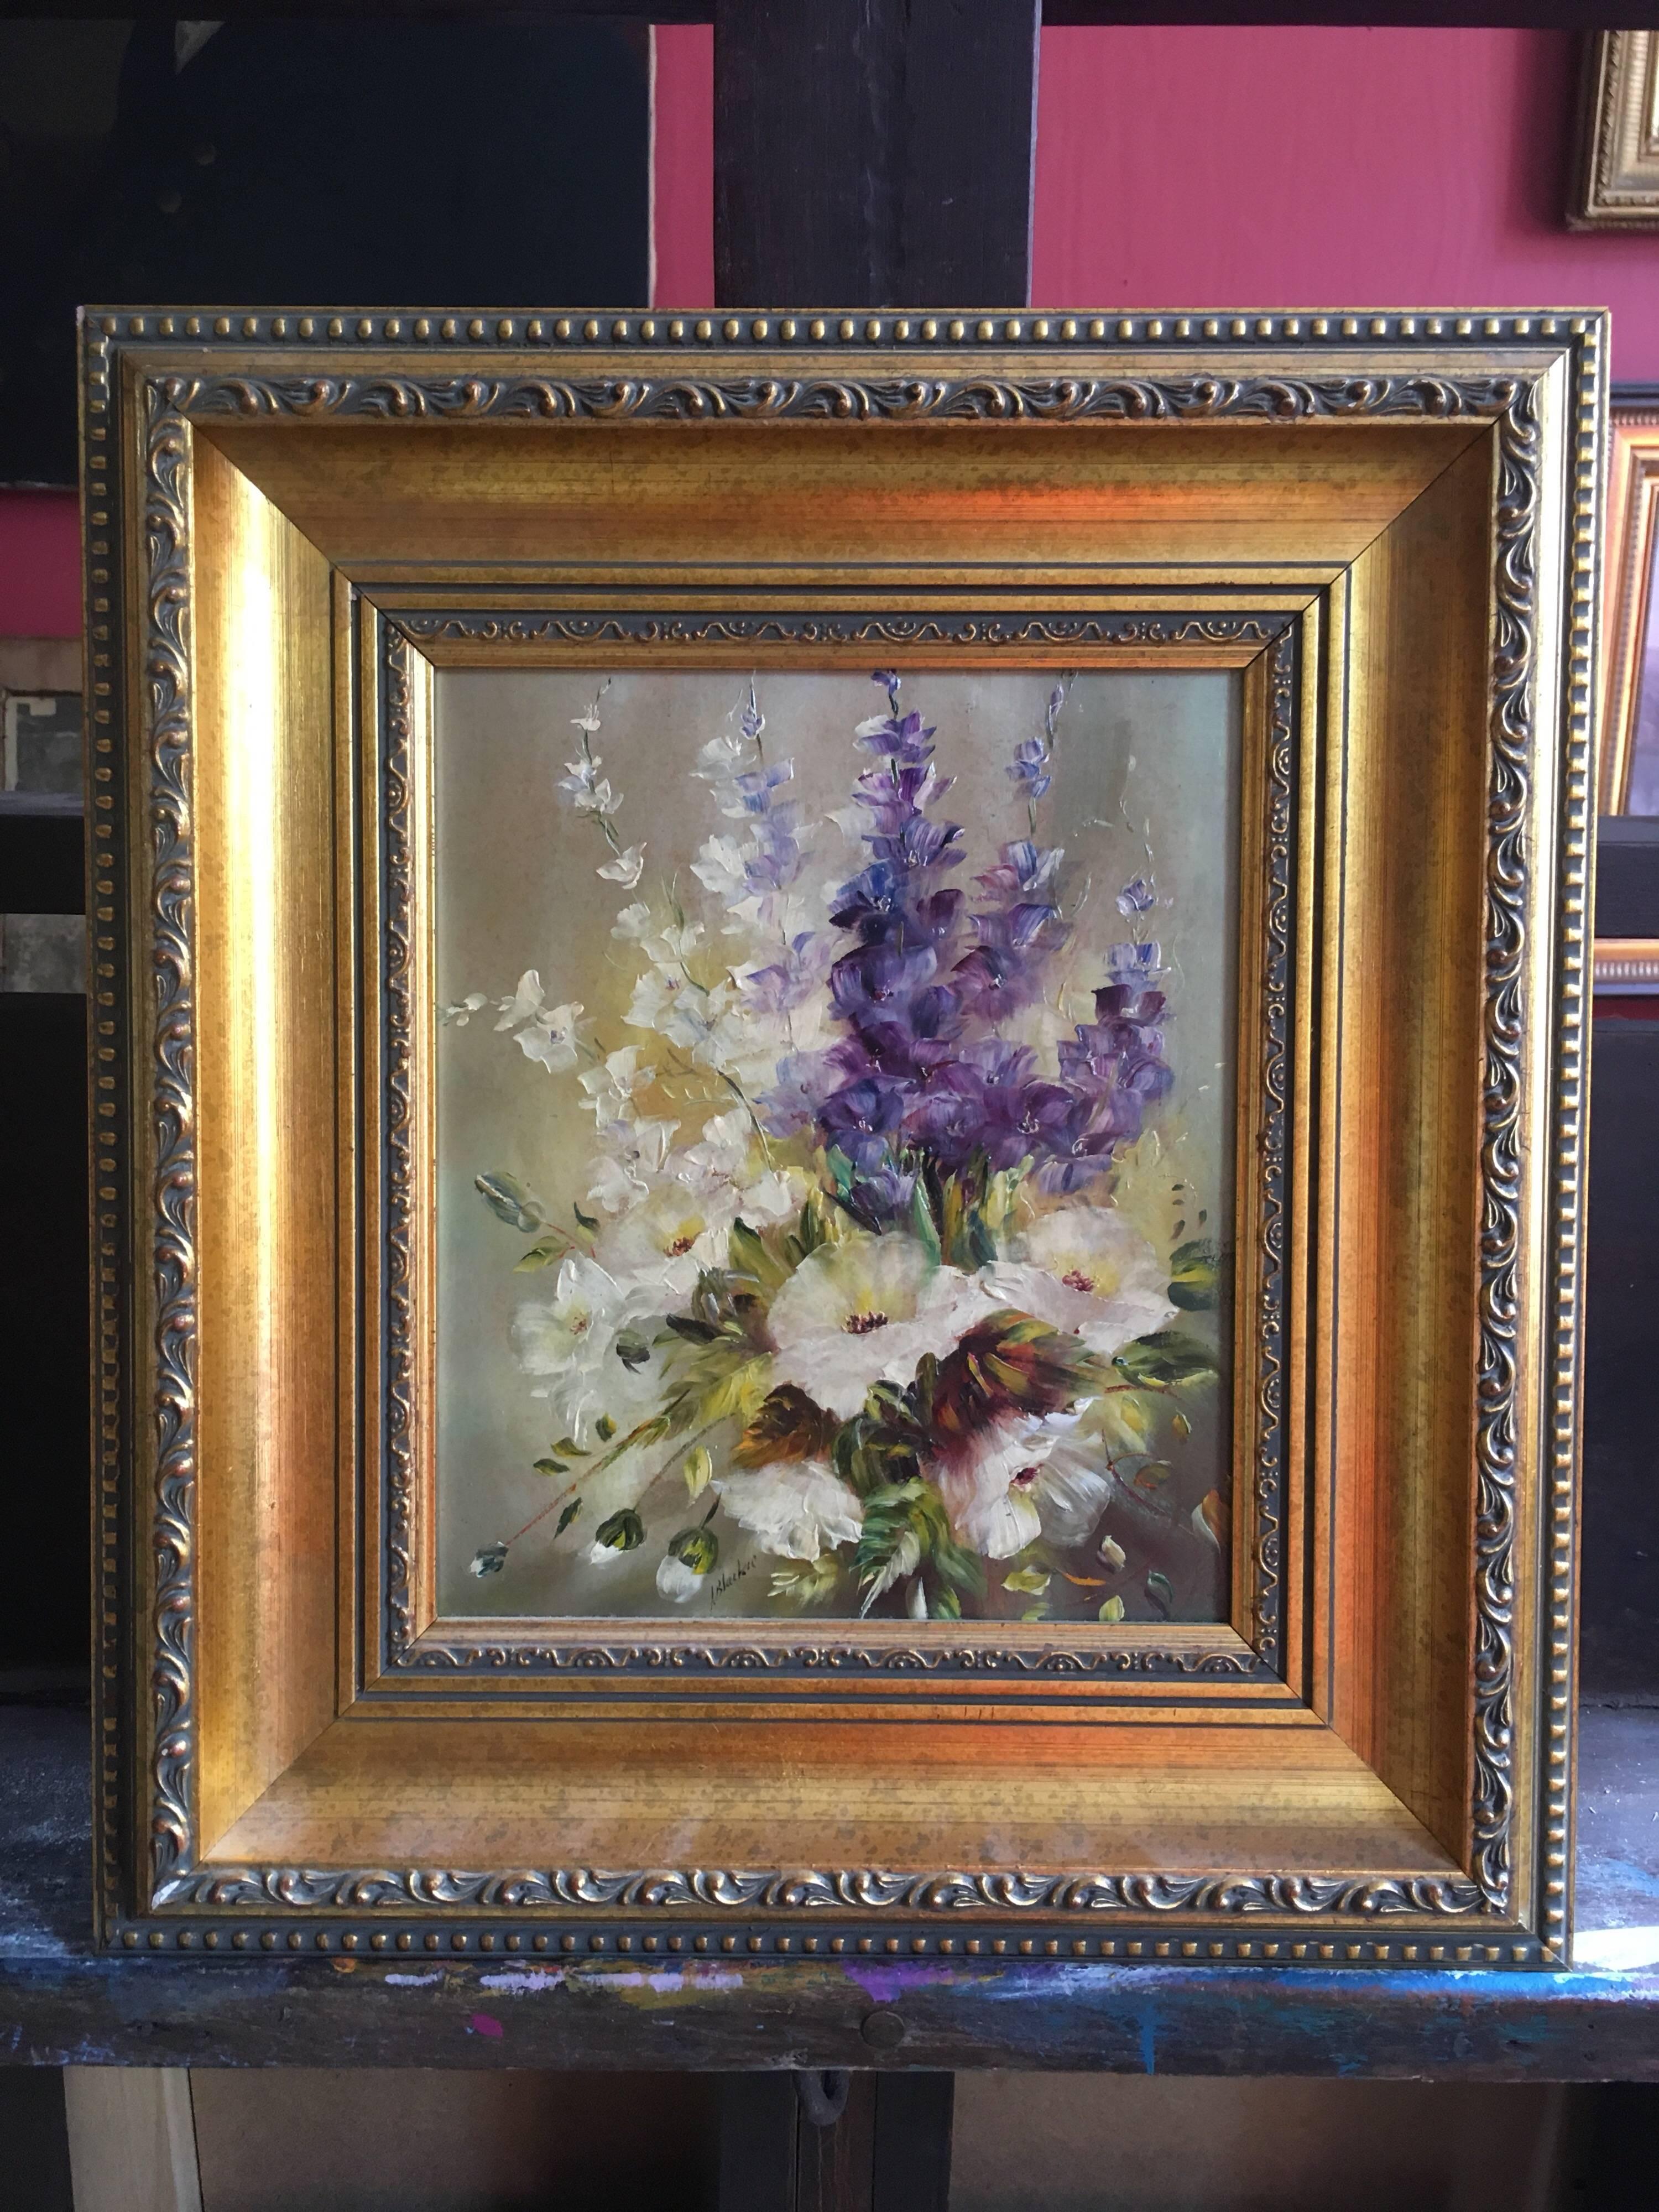 Foxglove Floral Arrangement
By Lillias Blackie, Scottish Artist, 20th Century
Signed by the artist on the left hand corner
Oil painting on board, framed
Framed size: 13.5 x 15.5 inches

Beautiful floral arrangement, one that looks like it has been